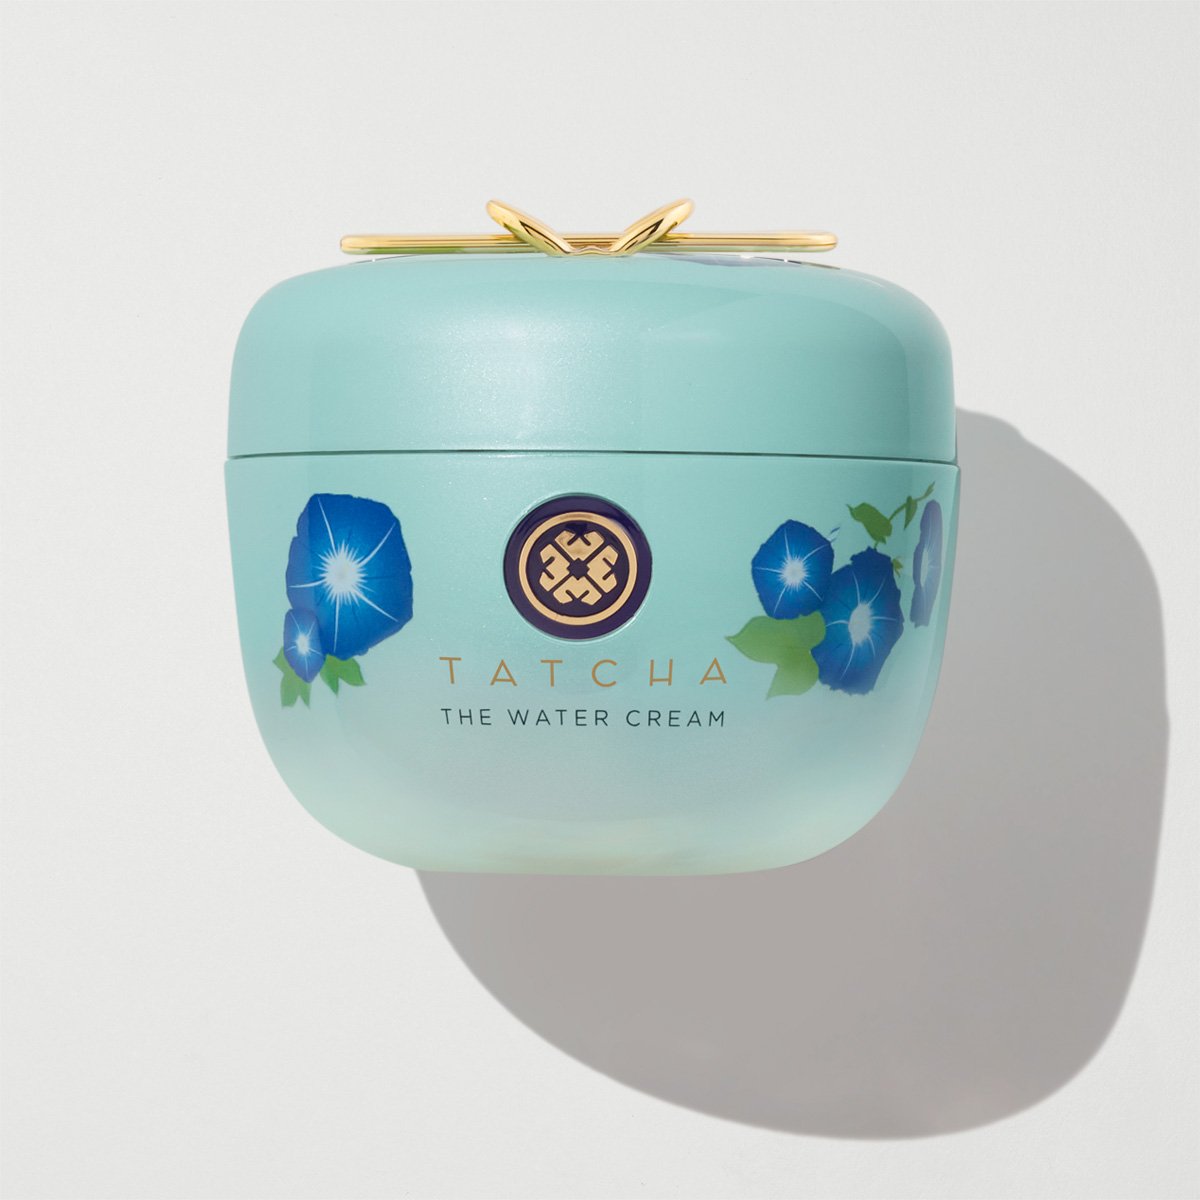 Tatcha The Water Cream - Limited Edition In White